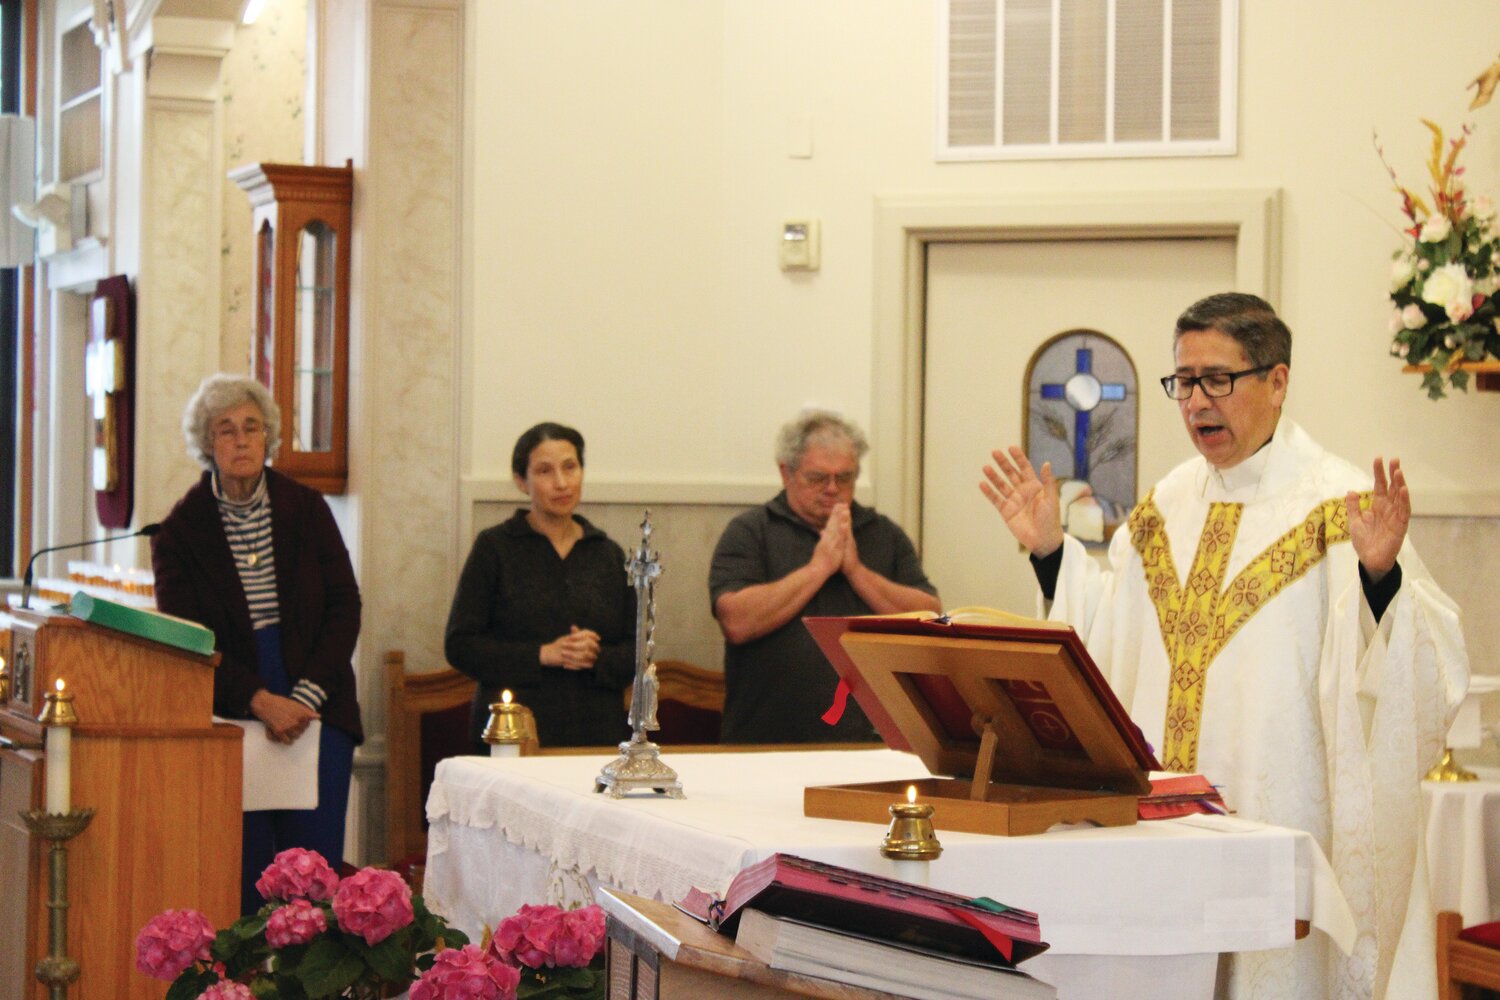 On Saturday, April 29, the Shrine of the Little Flower celebrated the 100th Anniversary of the Beatification of St. Thérèse of Lisieux. The day’s devotions included bilingual (English / Spanish) Mass, followed by an outdoor procession with the saint’s relic, and luncheon. The Shrine’s museum also offered tours for visitors.